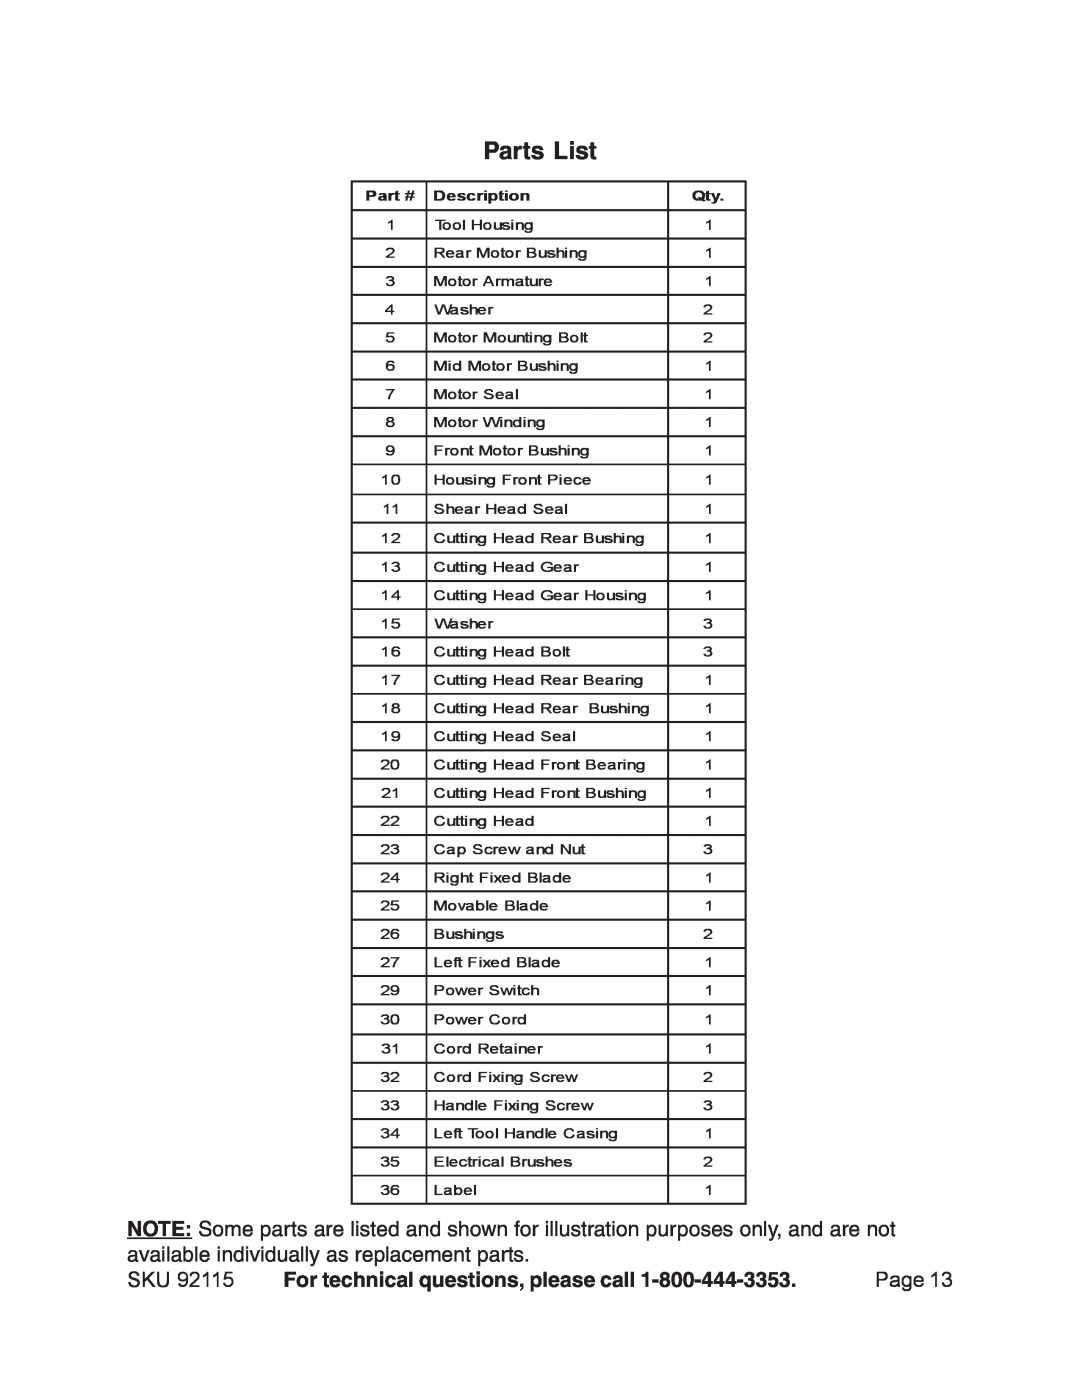 Harbor Freight Tools 92115 manual Parts List, For technical questions, please call, Page, Description 